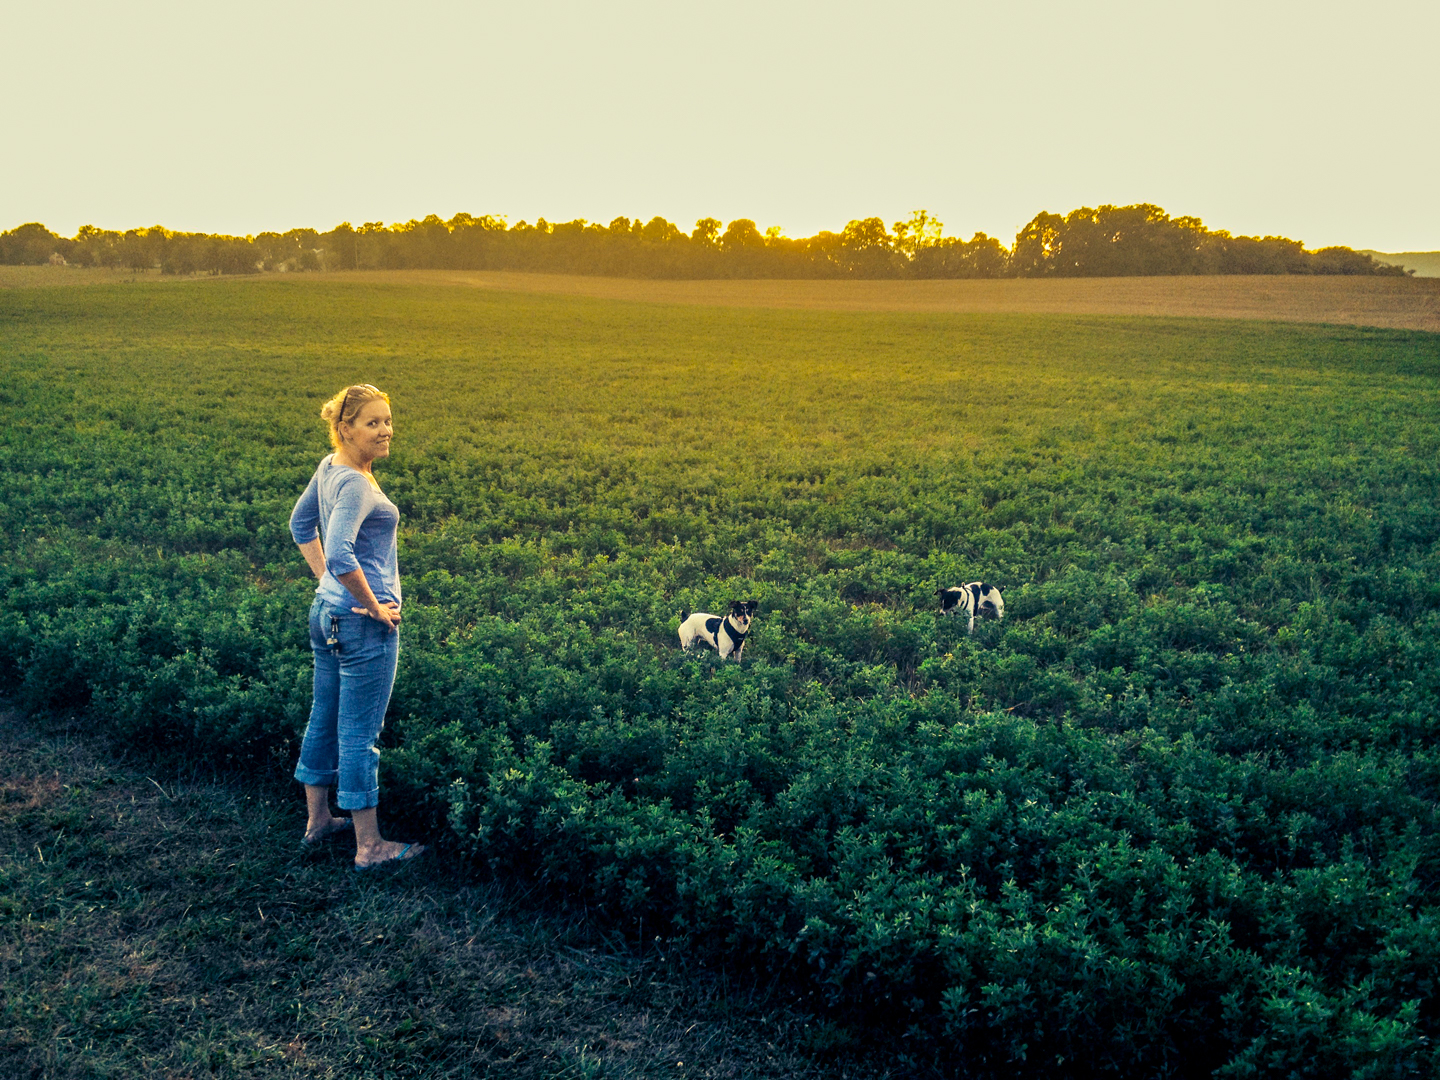 Melissa Hombosky stands in a field as the sun sets, smiling and watching her dogs play